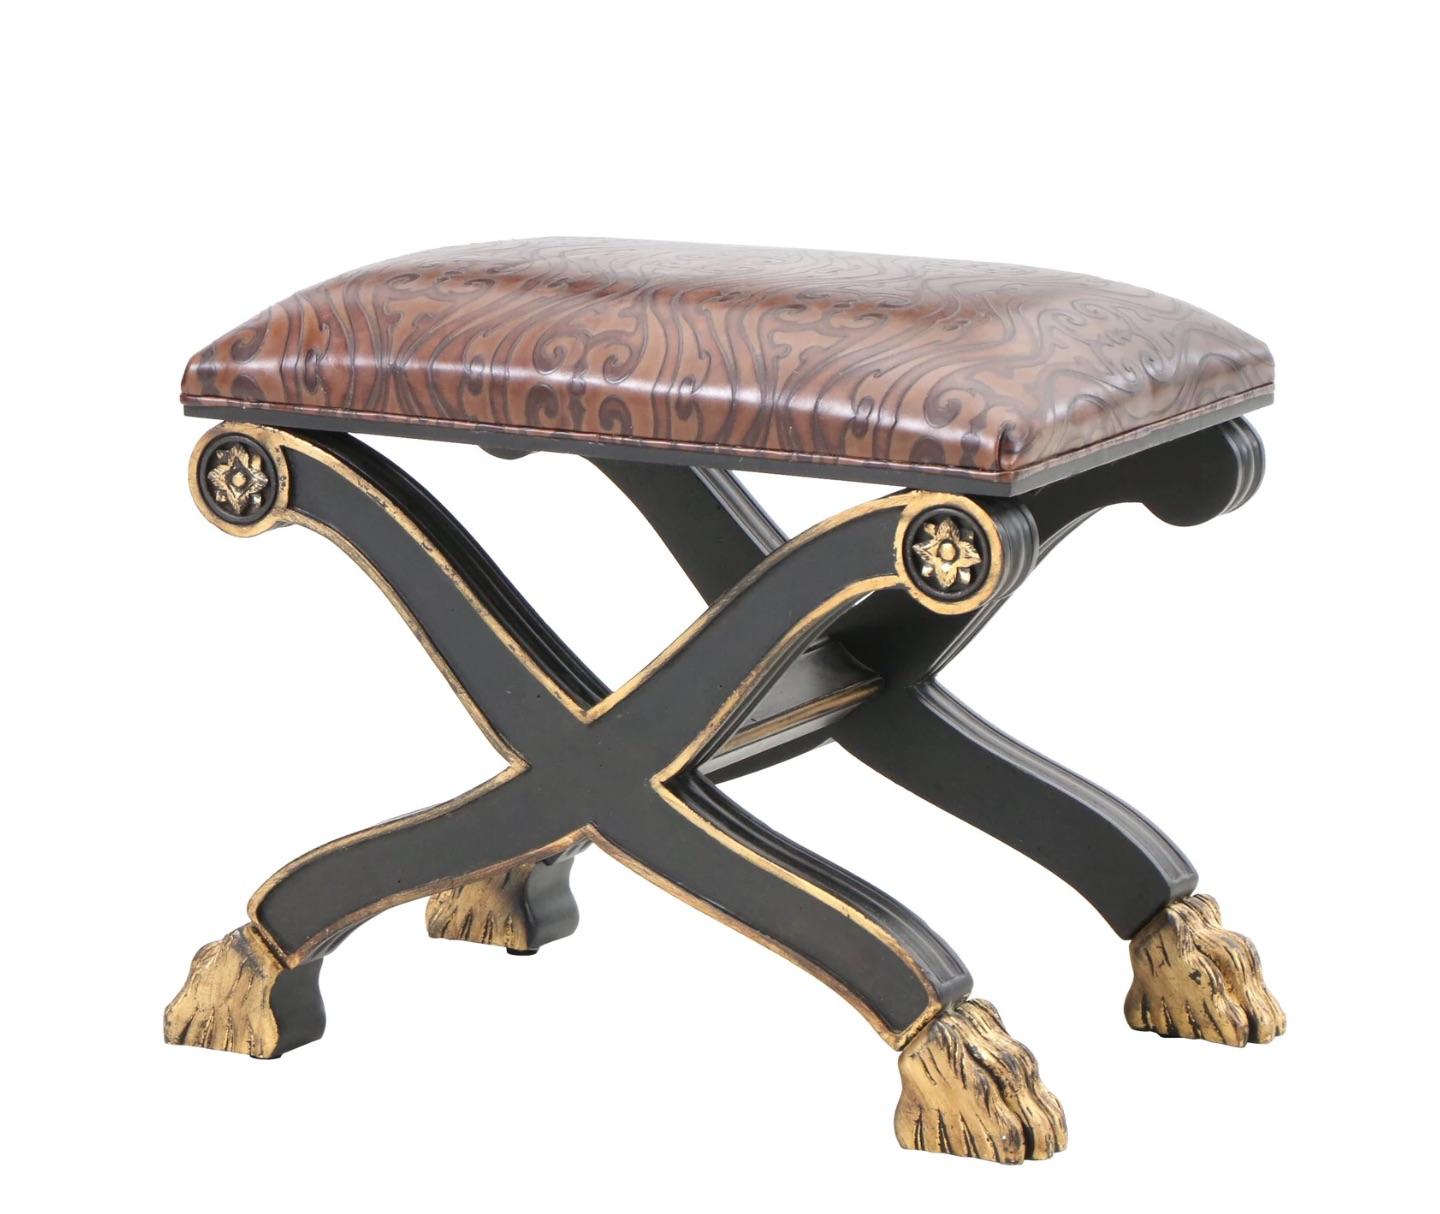 A rare and unique Roman style- Empire style- black Curule ottoman with gilt details and carved gilt paw feet 
Lustrous embossed leather design on upholstered seat, perfect aged vintage patina and gilt details...
You will love how this looks in